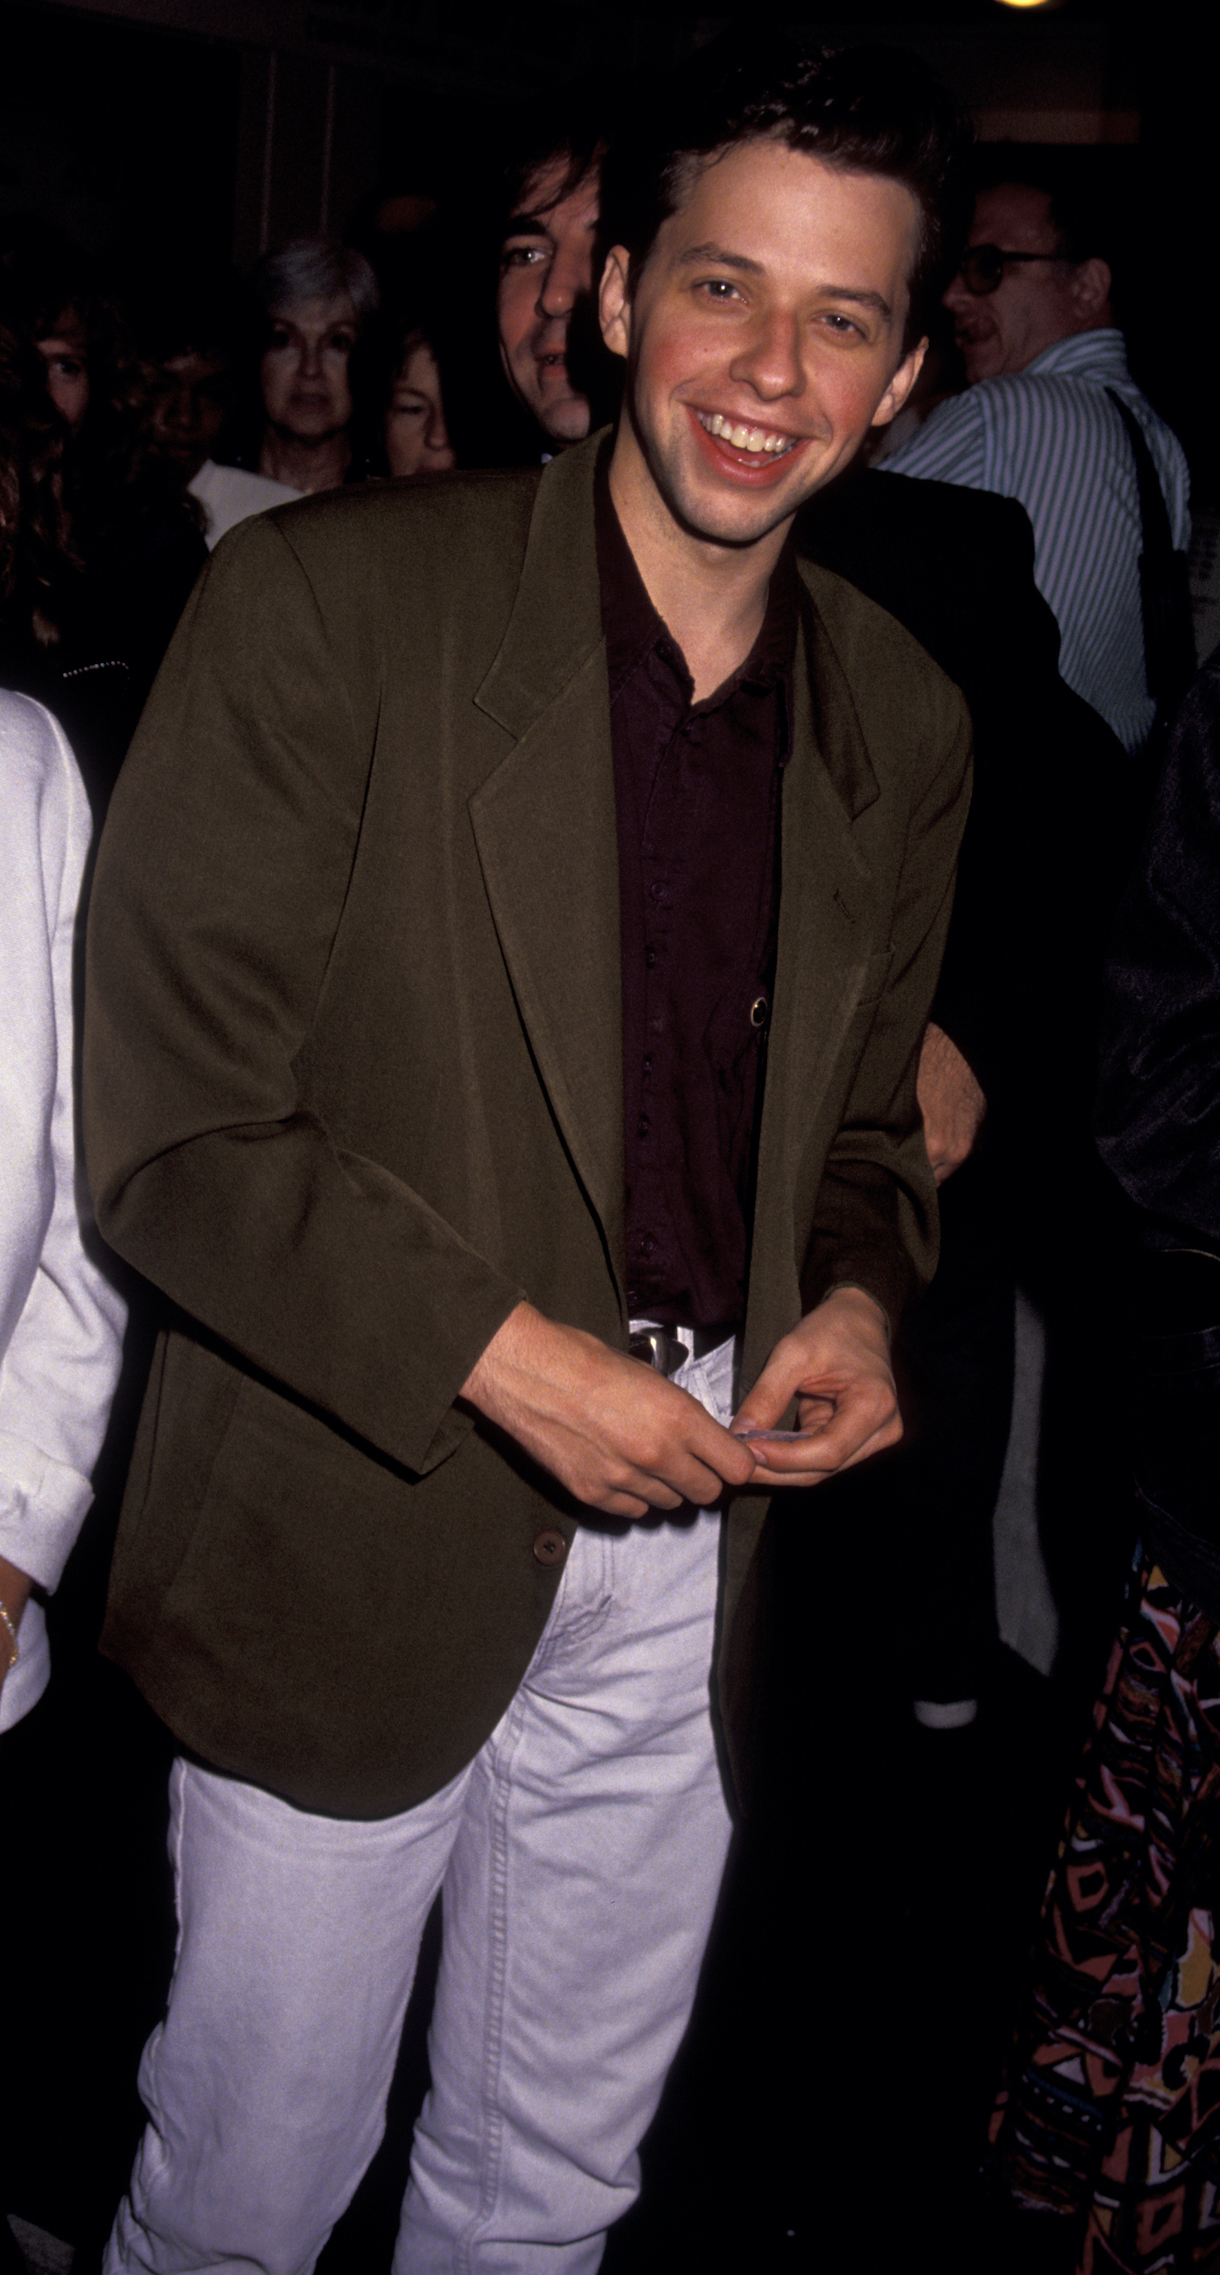 Jon Cryer attends the performance of "Love Letters" on July 30, 1991